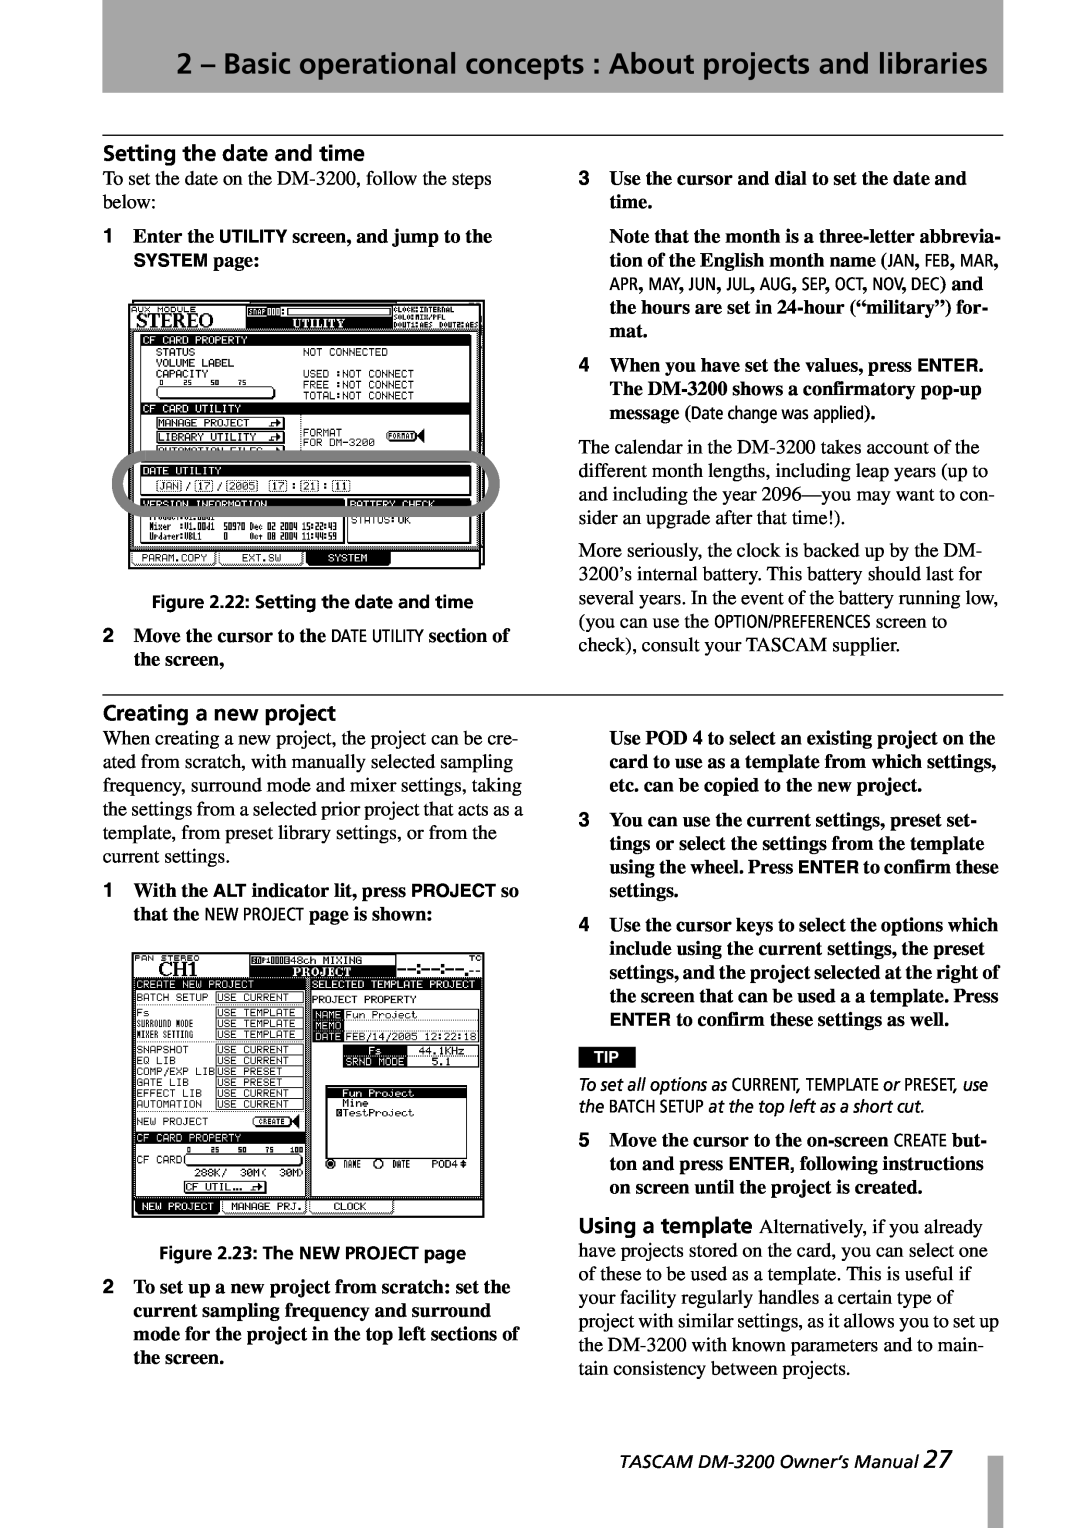 Tascam DM-3200 owner manual Setting the date and time, Creating a new project 